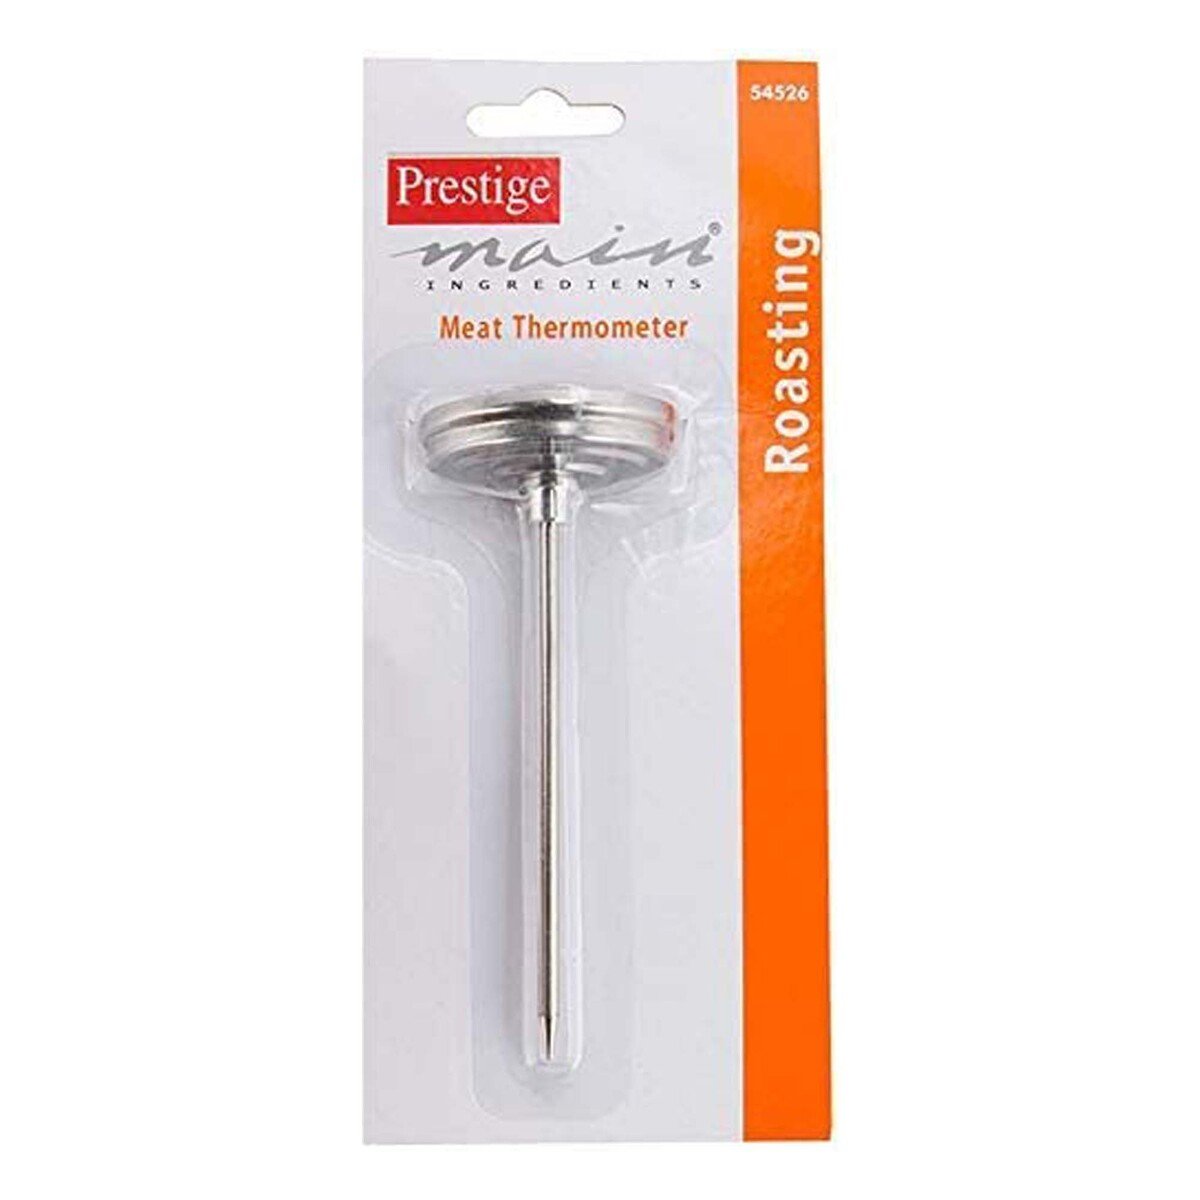 Prestige Meat Thermometer, Stainless Steel